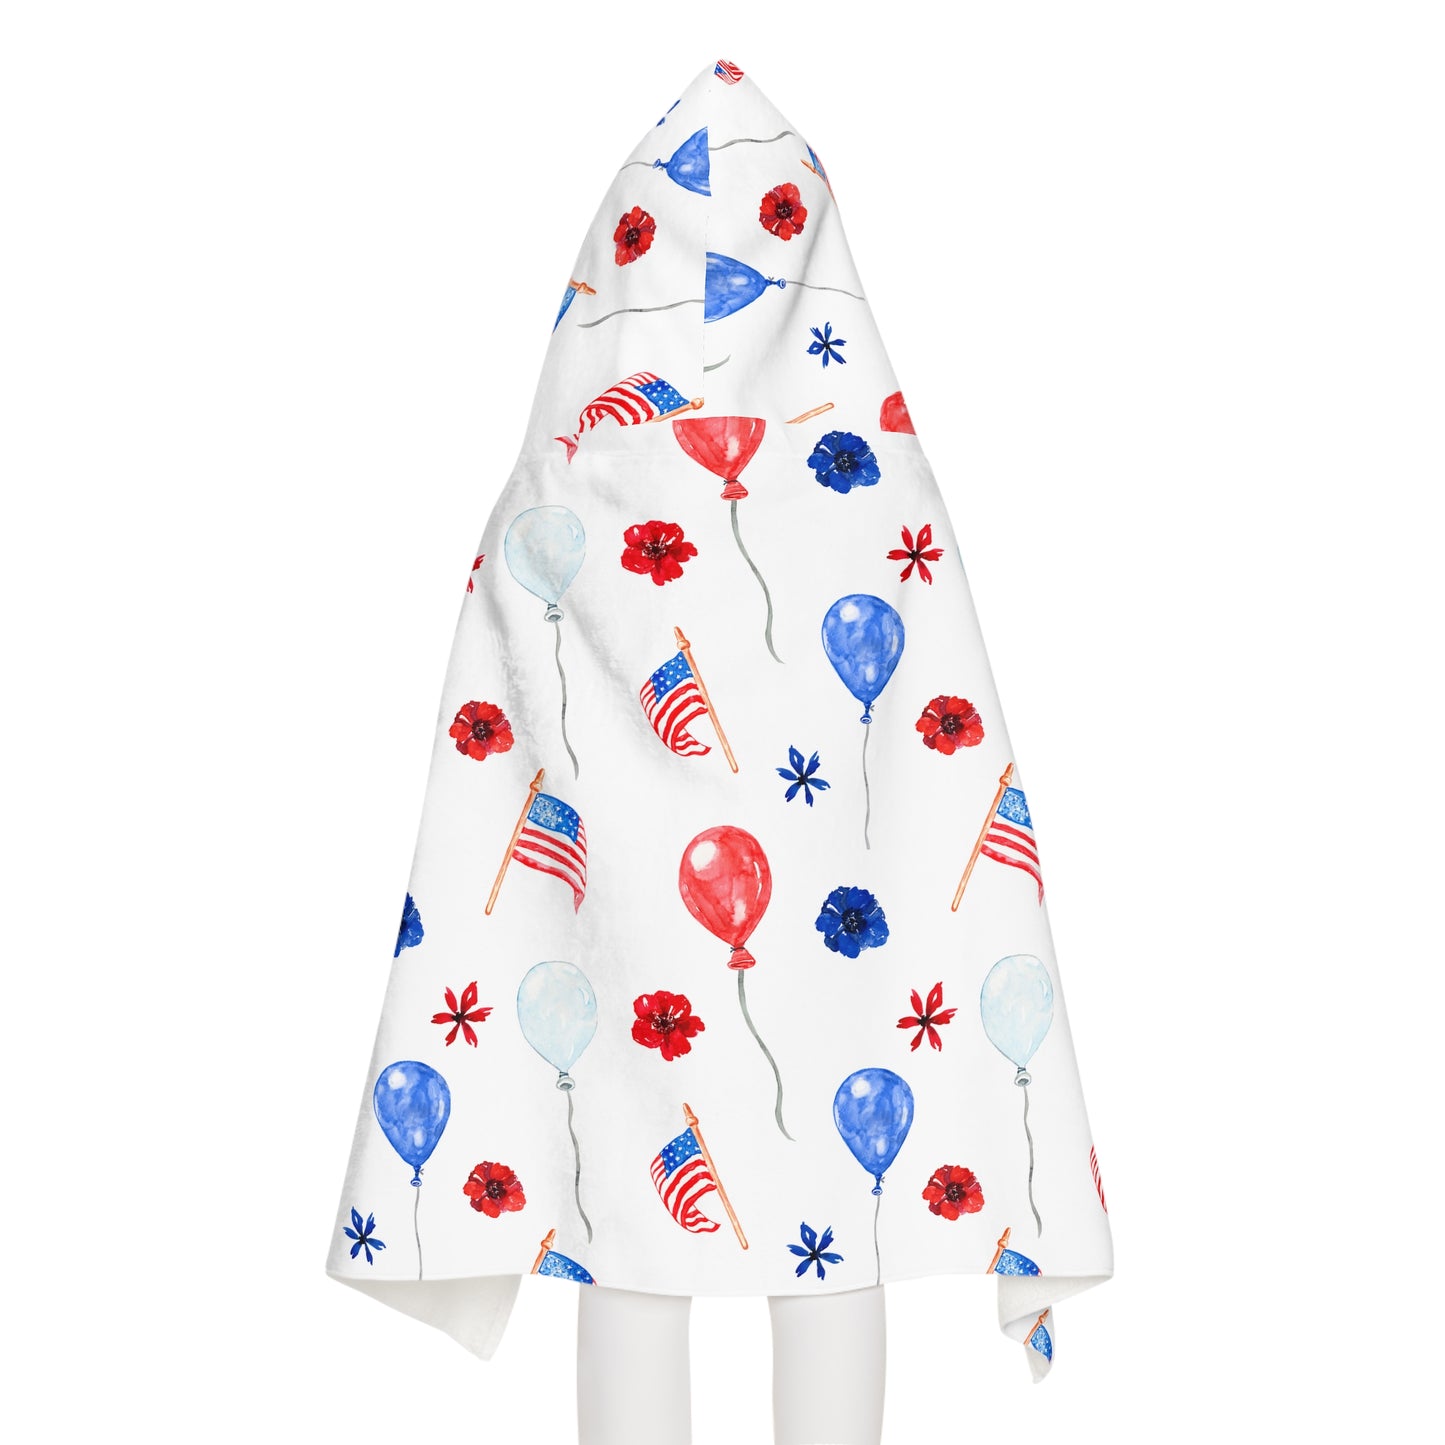 American Flags and Balloons Youth Hooded Towel